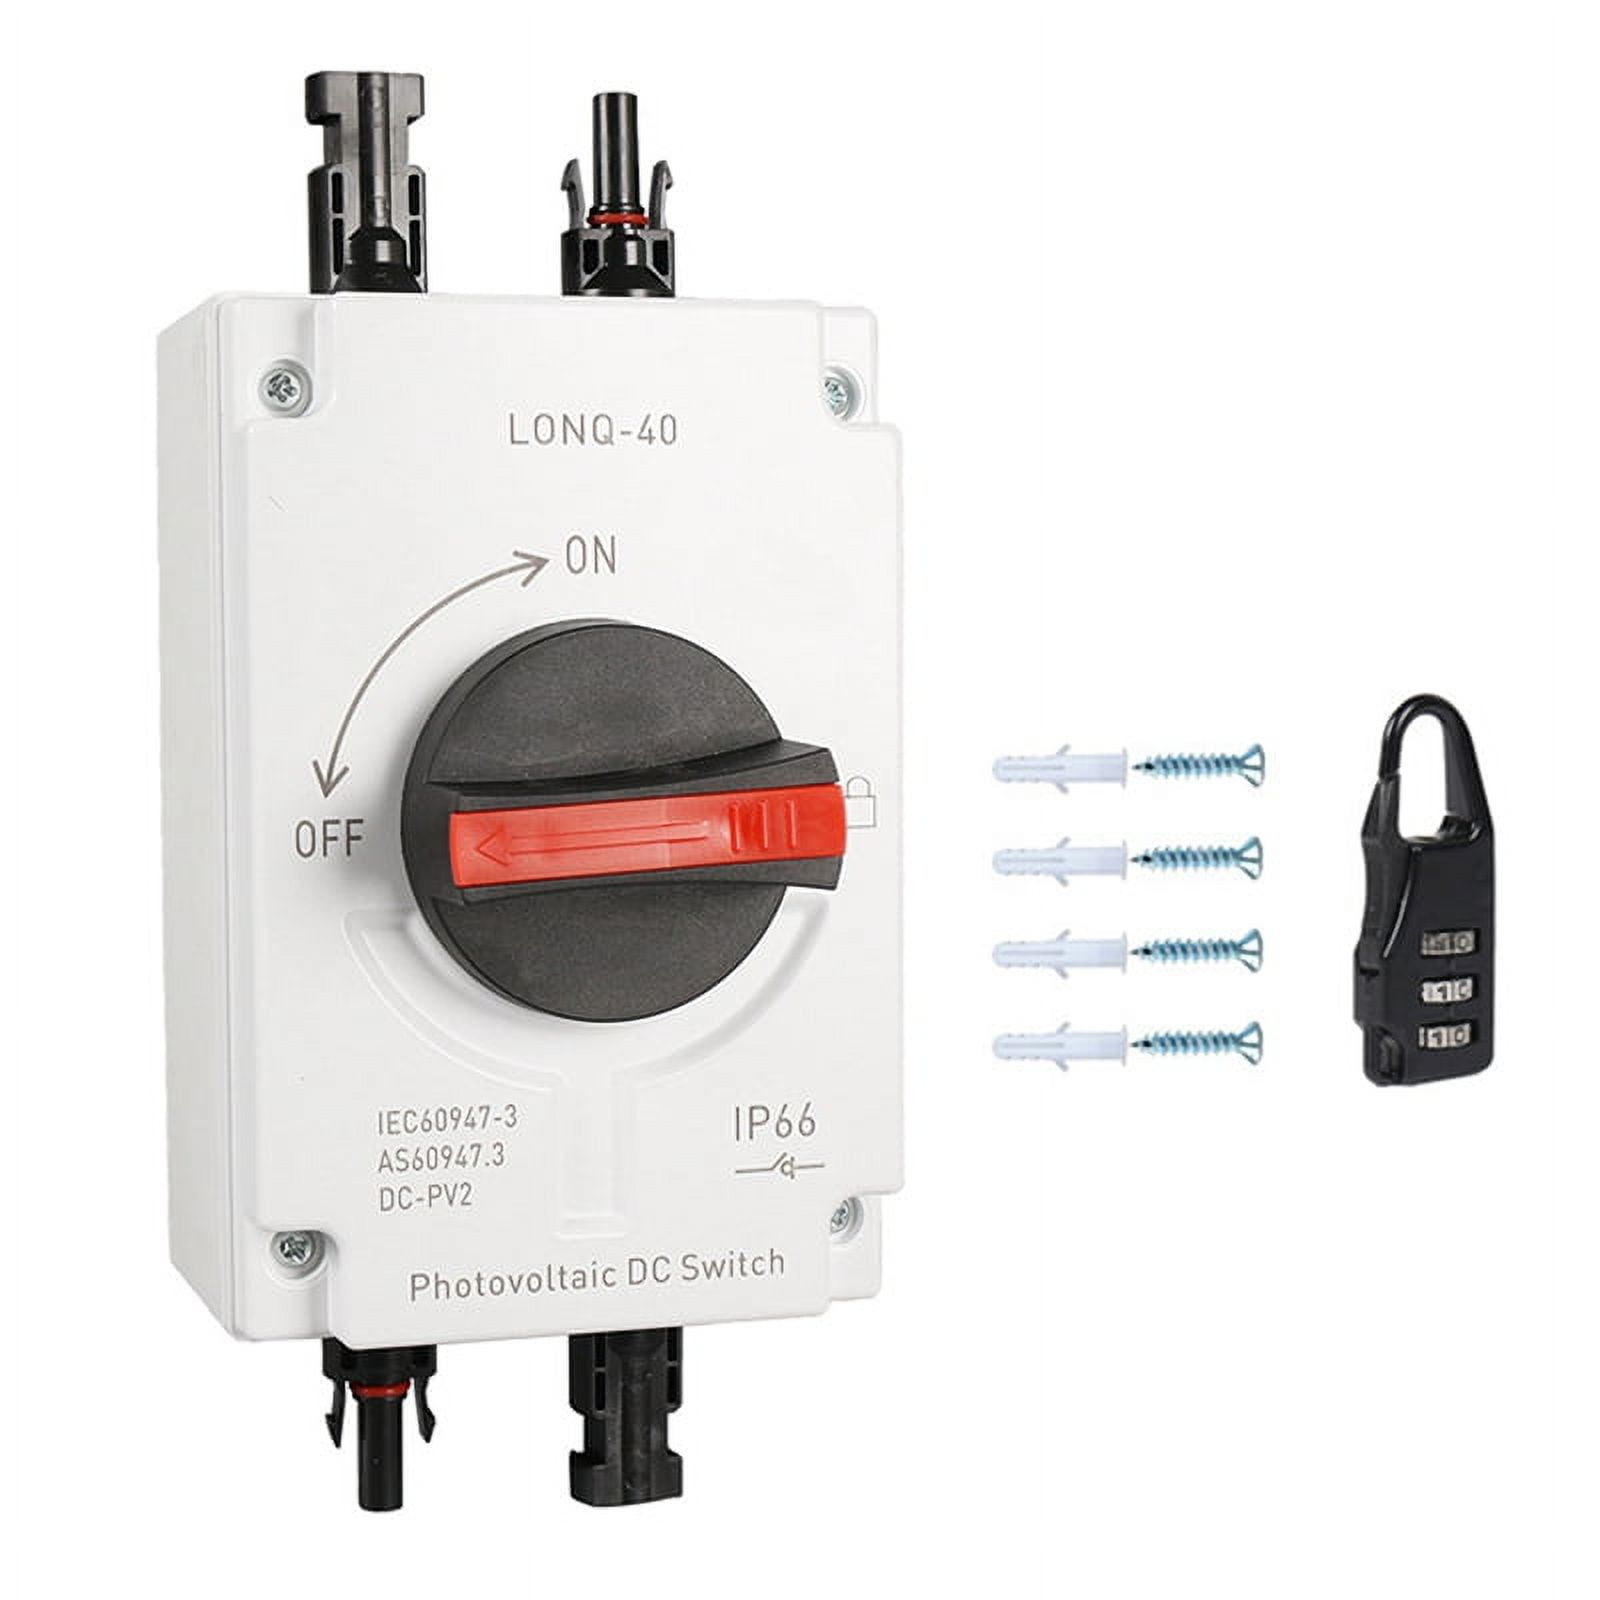 PV Solar Photovoltaic Disconnect Switch, LONQ-40 DC Isolator